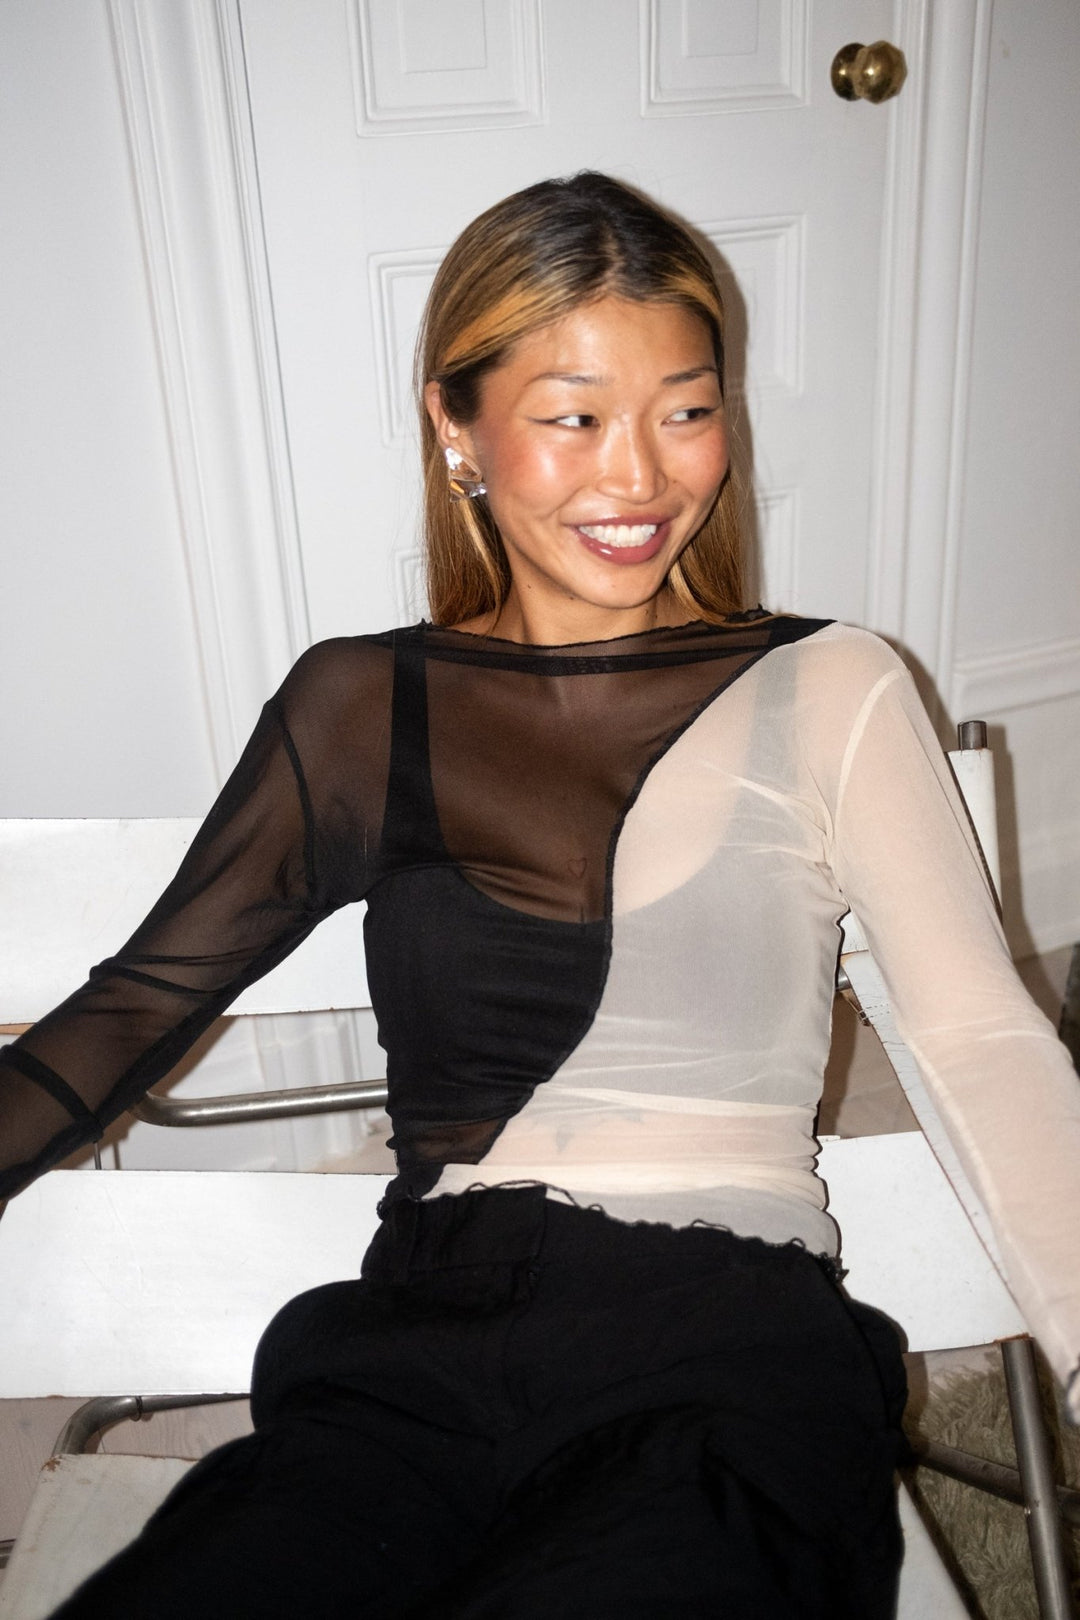 Mesh Top — Black / White by Nada Duele at White Label Project